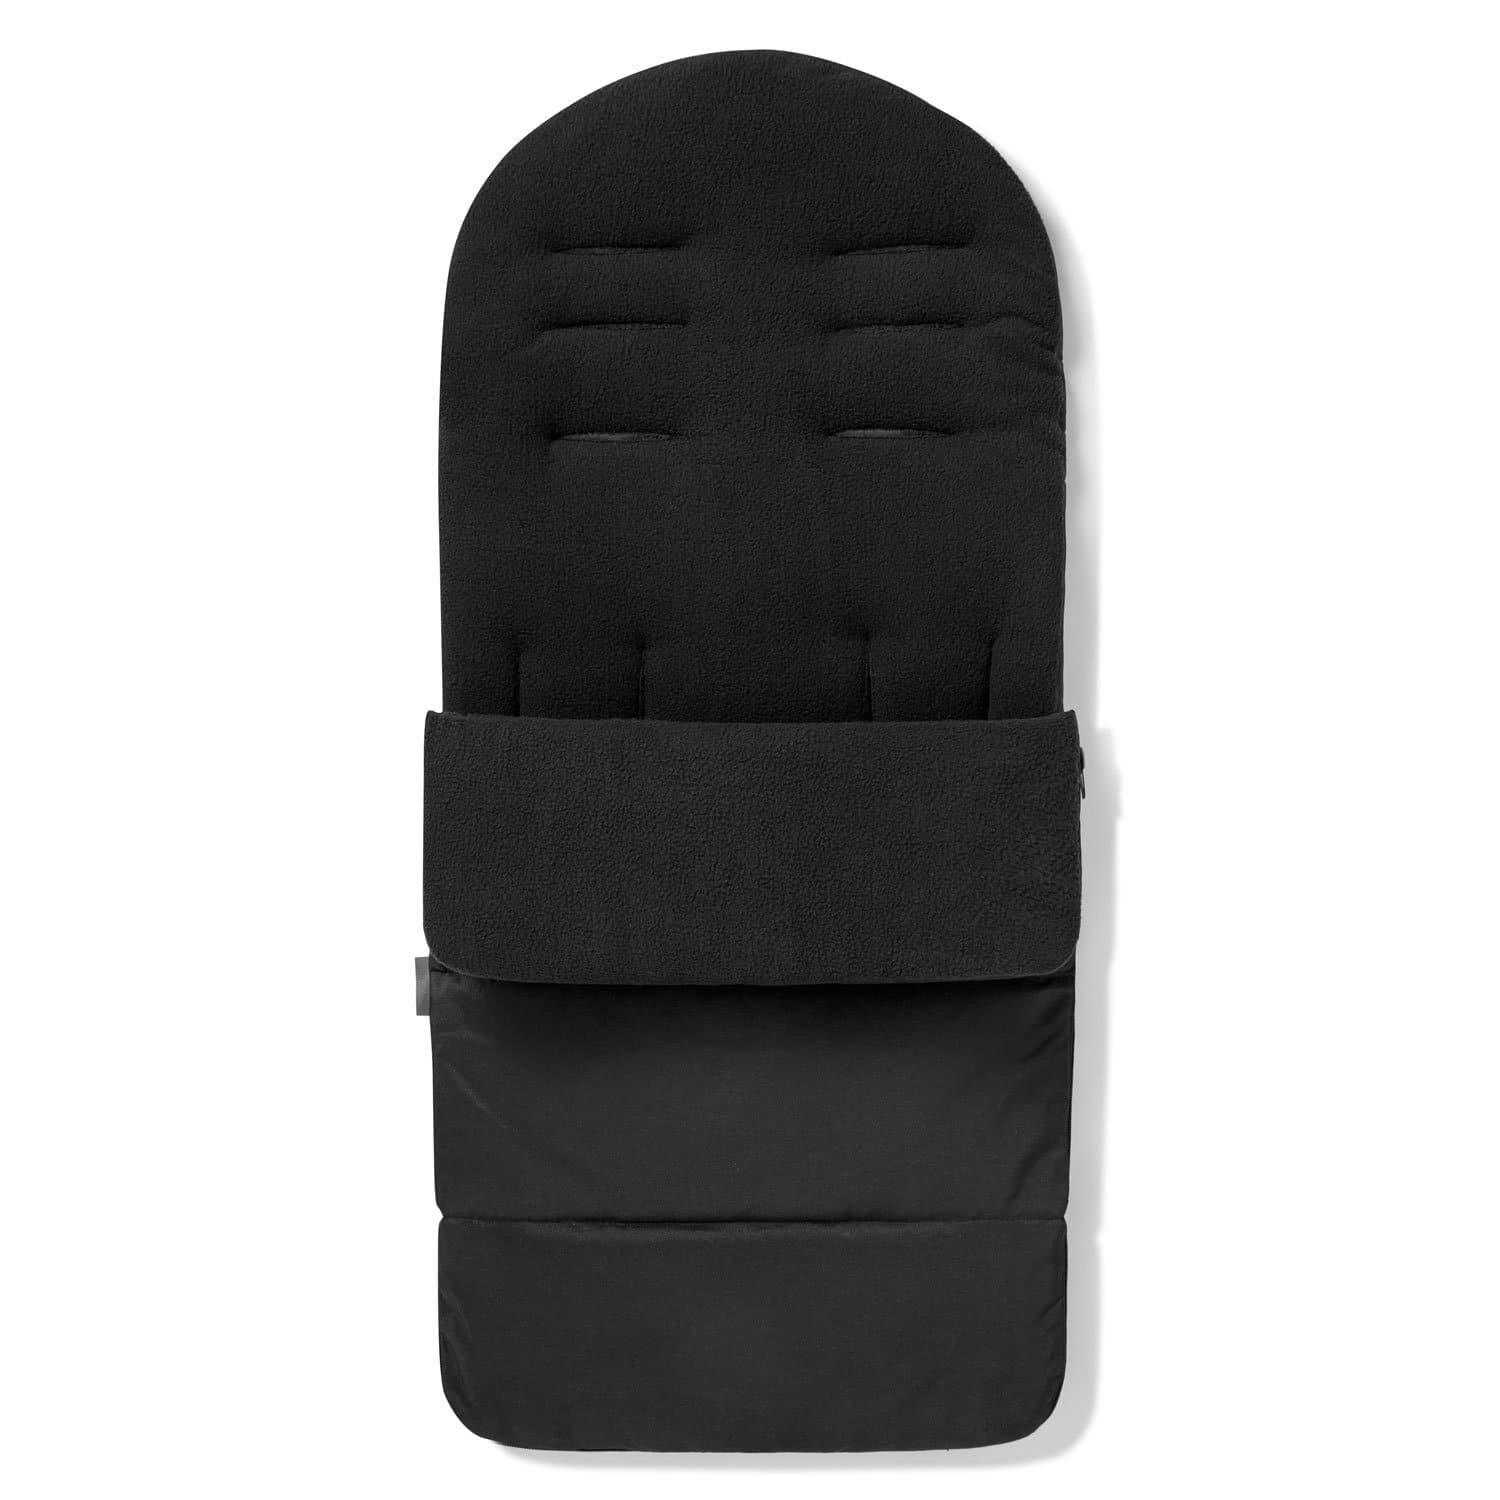 Premium Footmuff / Cosy Toes Compatible with GB - Black Jack / Fits All Models | For Your Little One